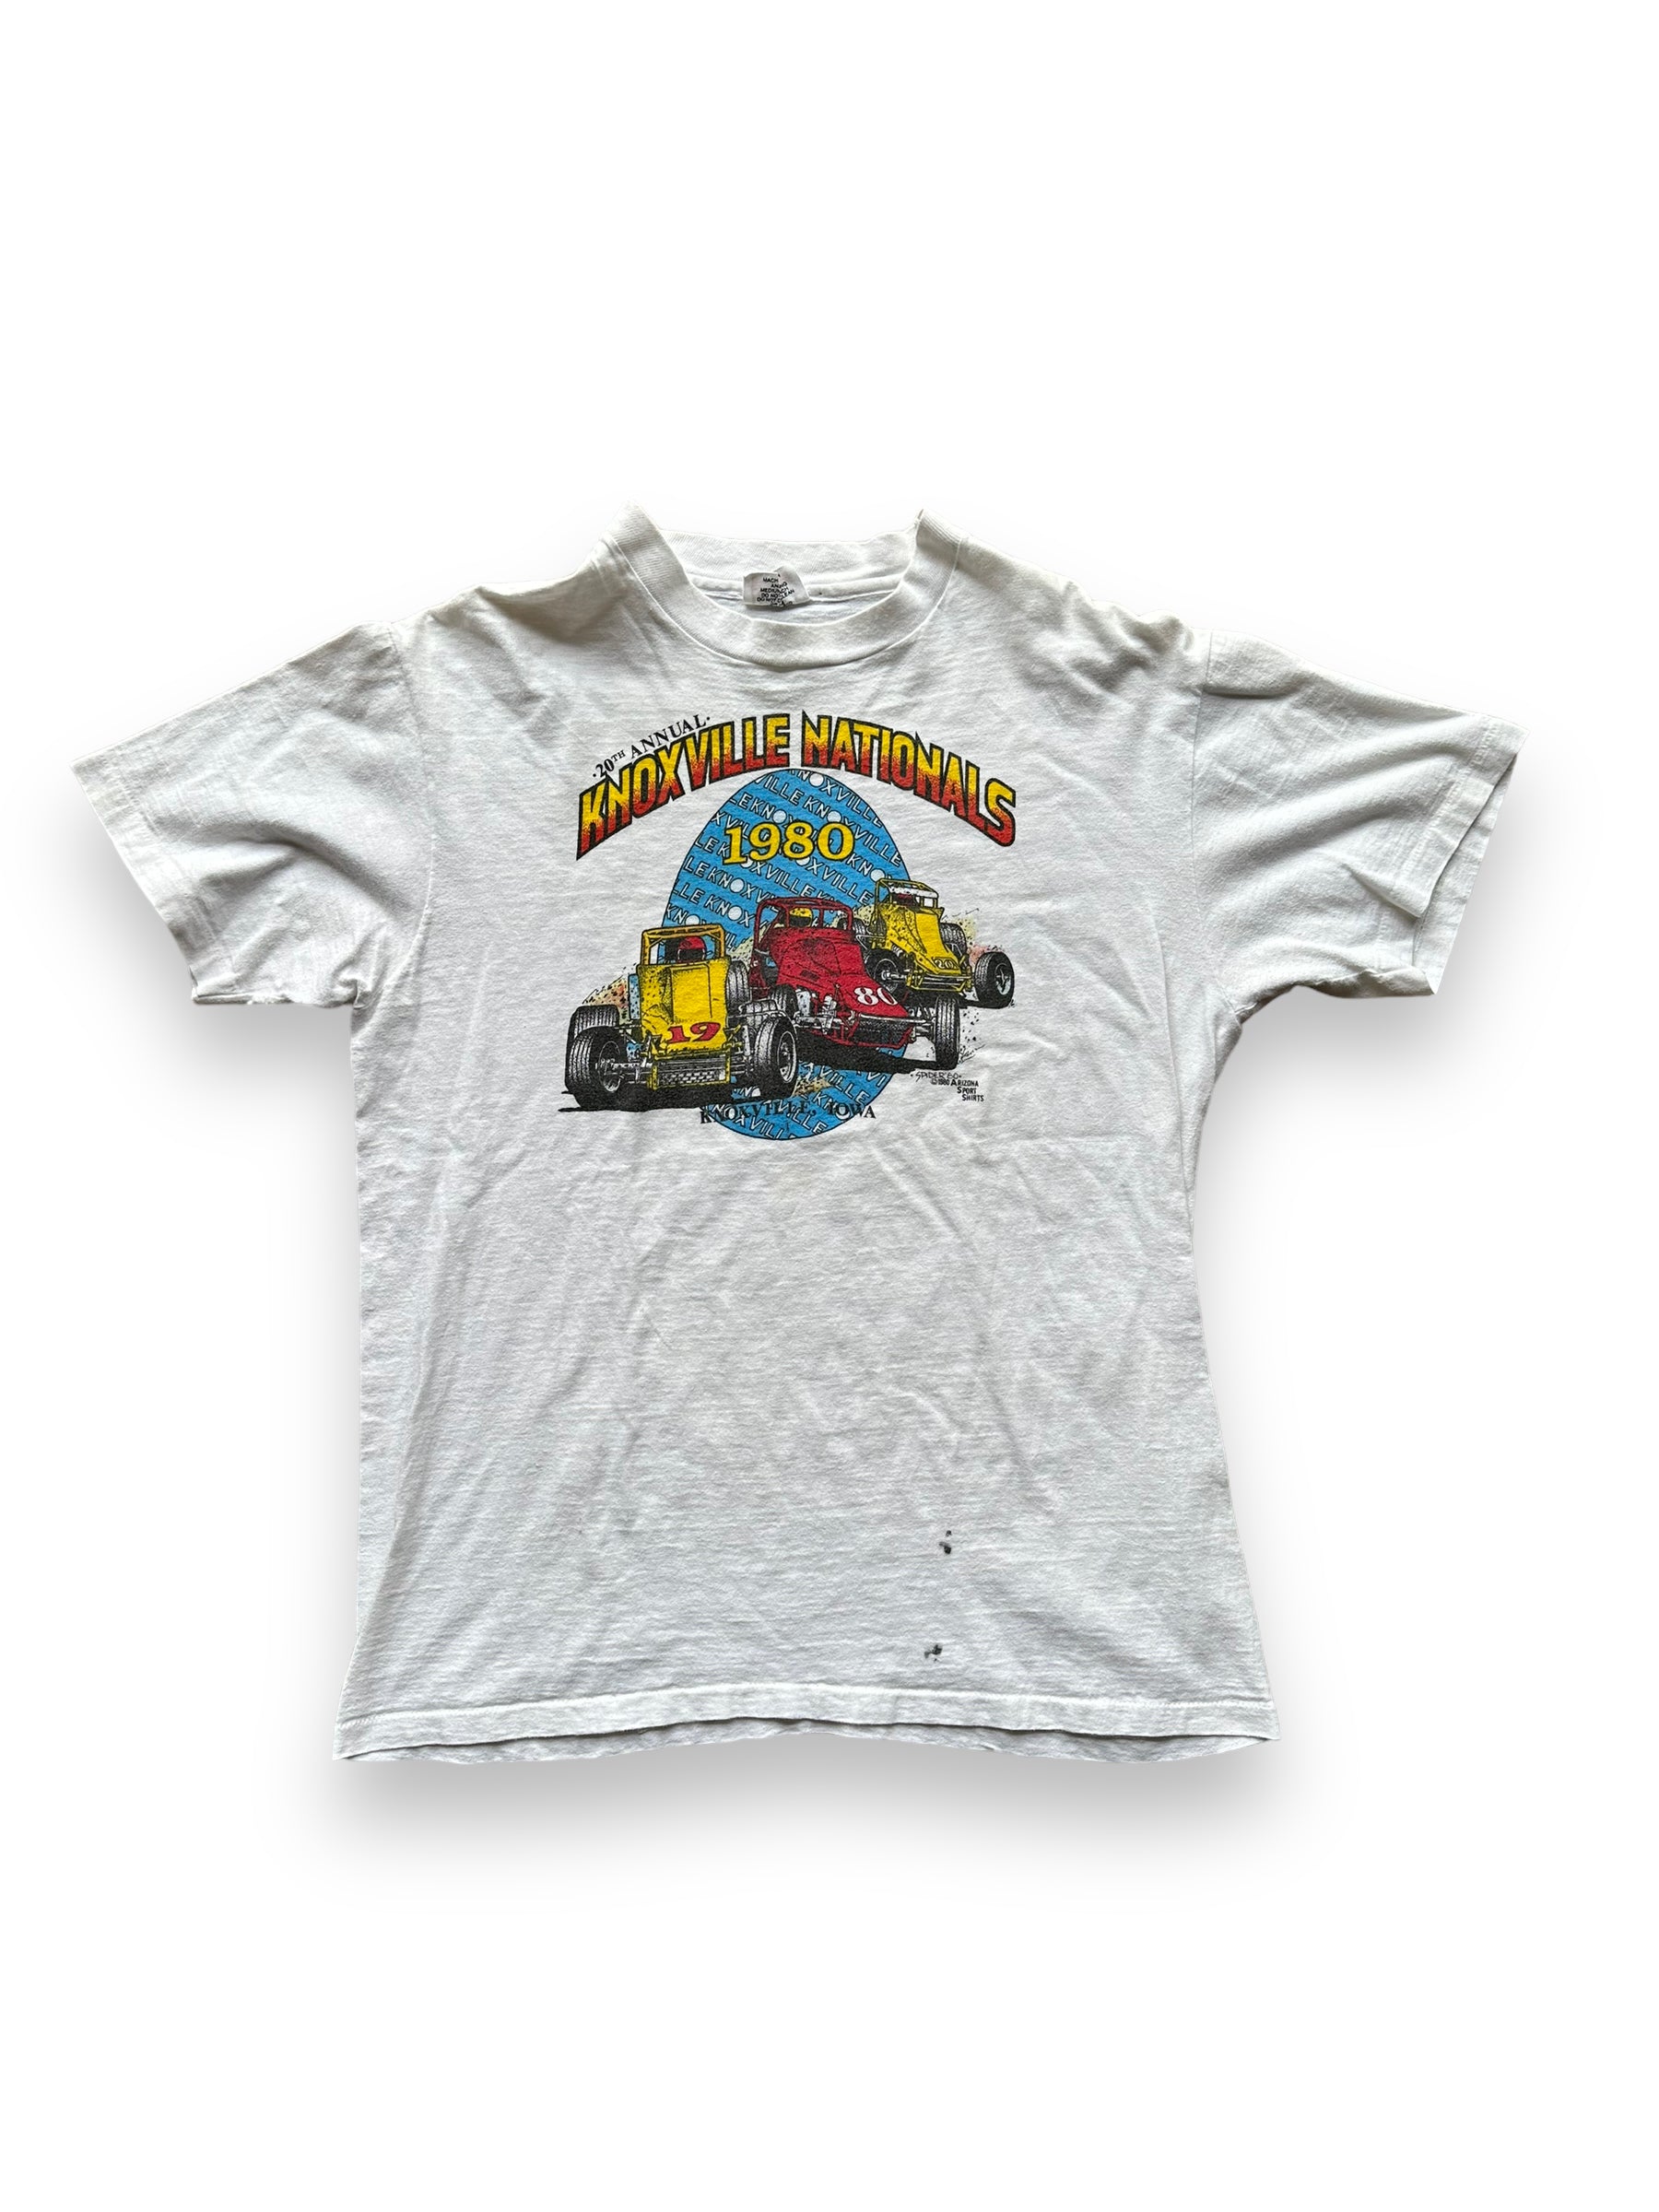 Front of Vintage 1980 Knoxville Nationals Tee SZ L |  Vintage Auto Tee Seattle | Barn Owl Vintage